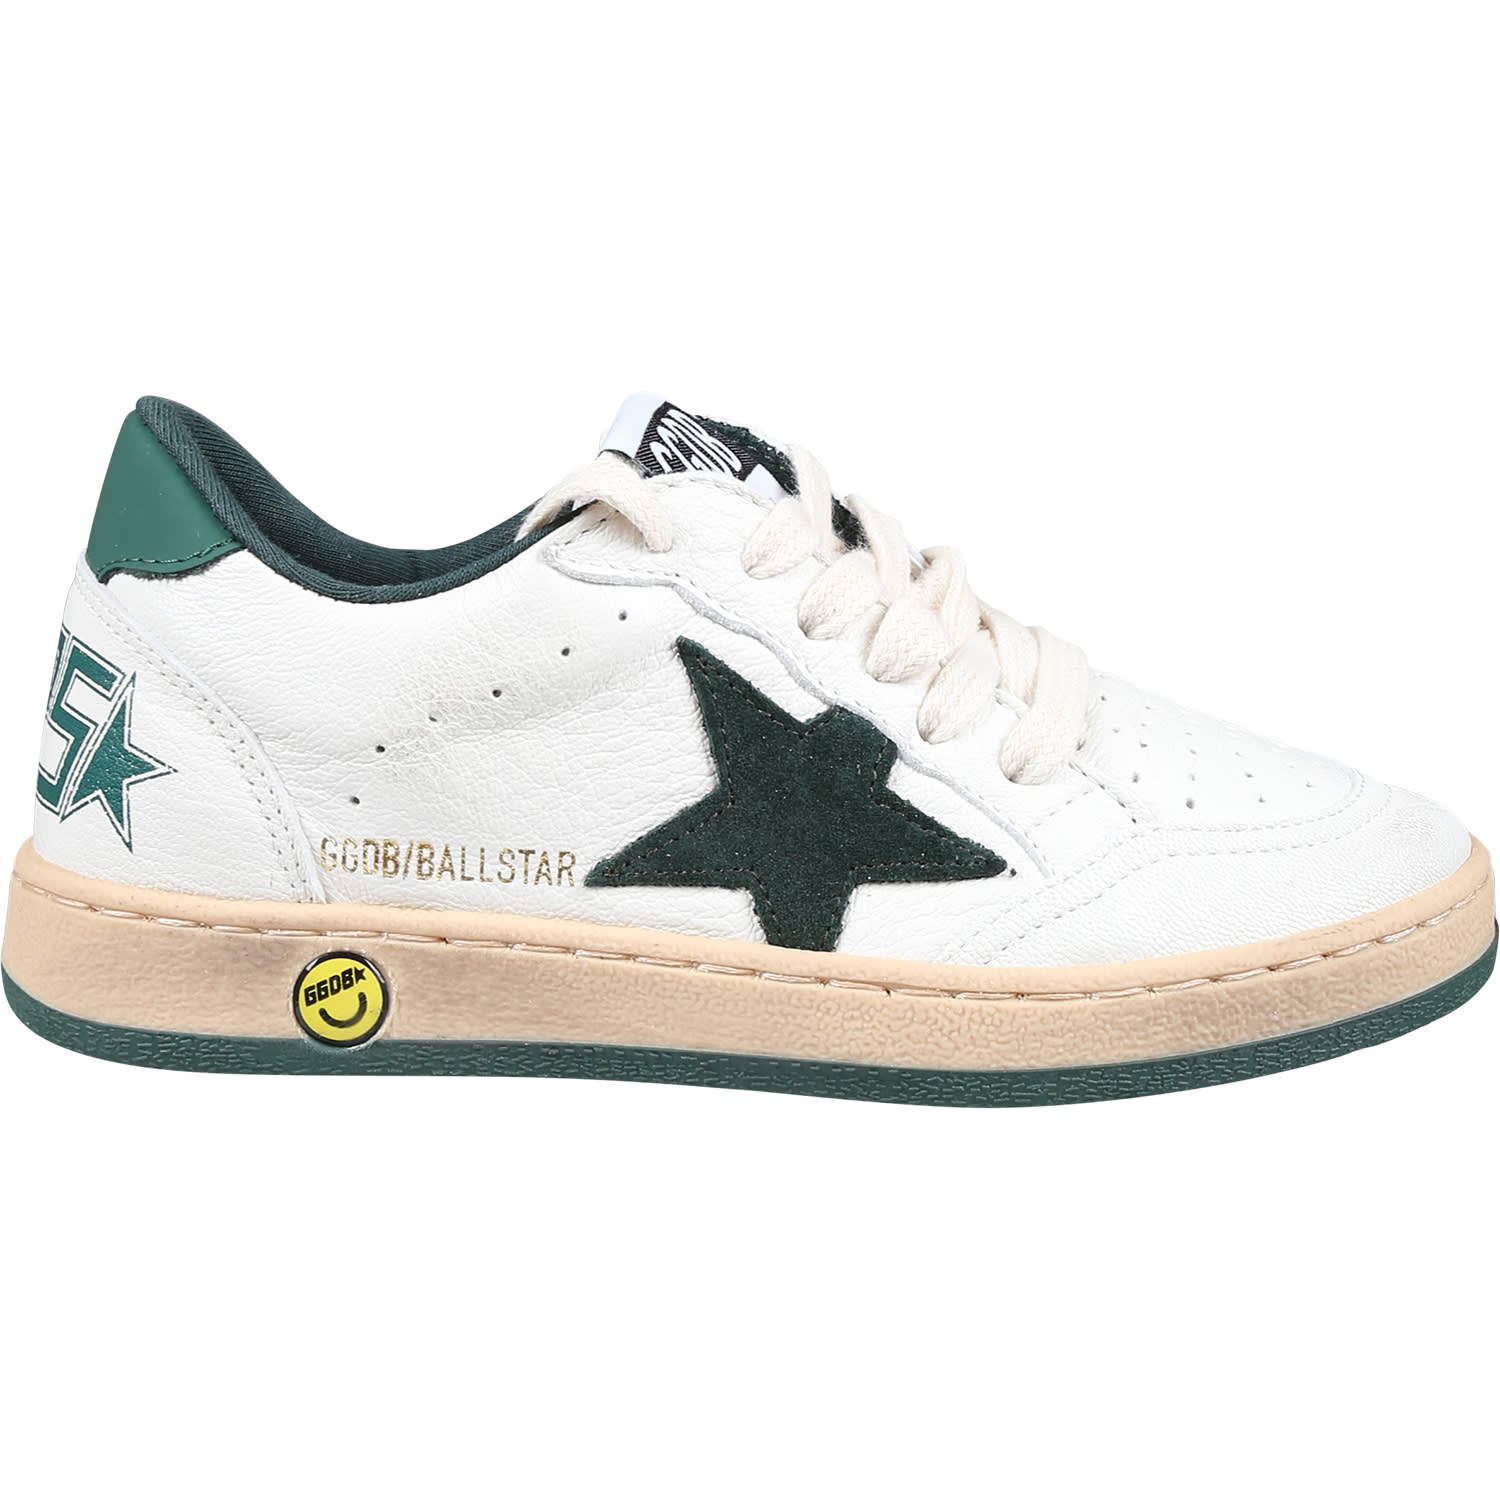 Golden Goose White Ball Star New Sneakers For Kids With Star